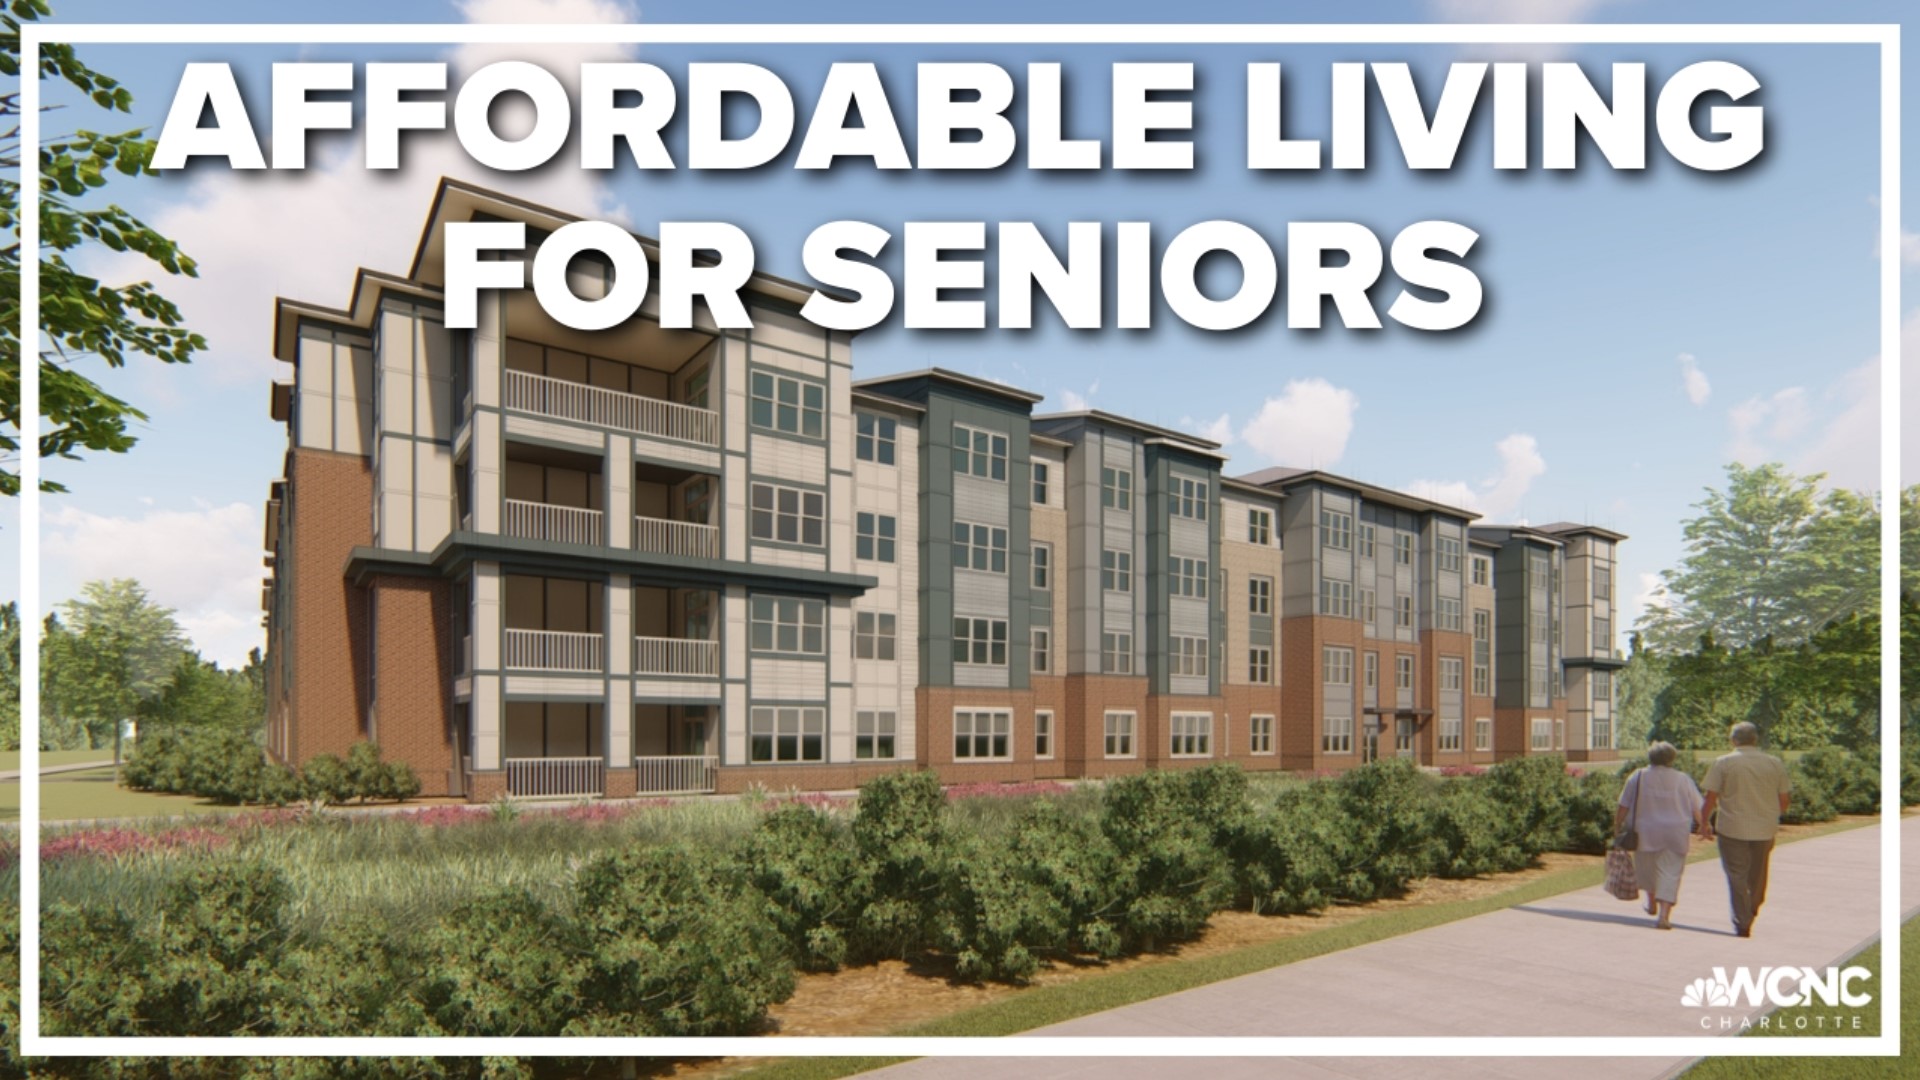 Plans are moving forward to develop a 120-unit affordable apartment living space for seniors. Bank of America helped to make it happen through a grant.